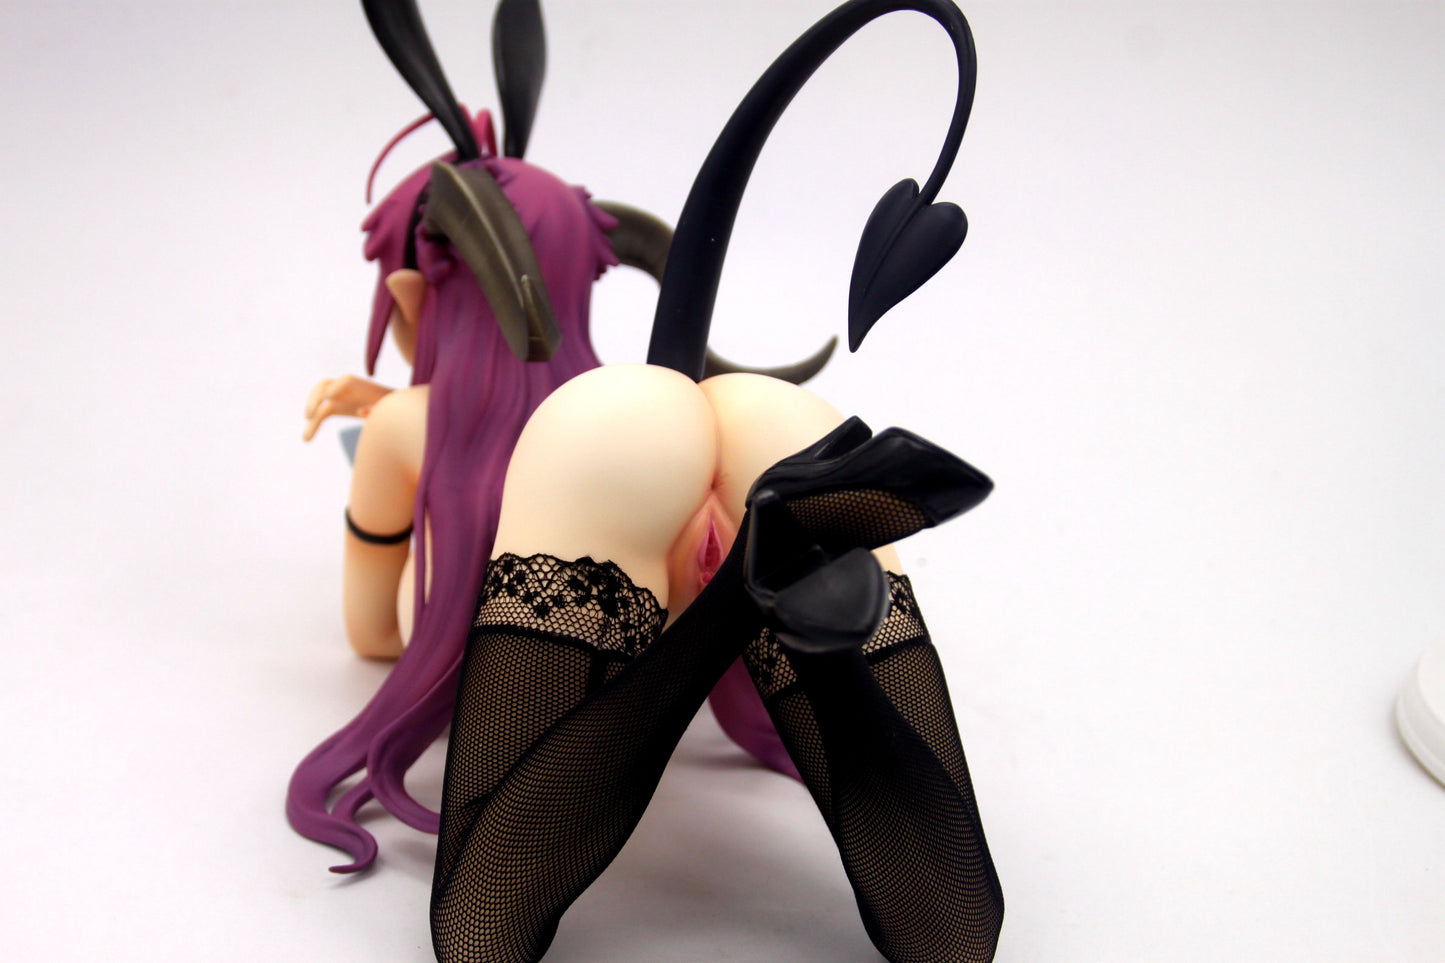 The Seven Deadly Sins Asmodeus Bunny Ver. 1/4 naked anime figure